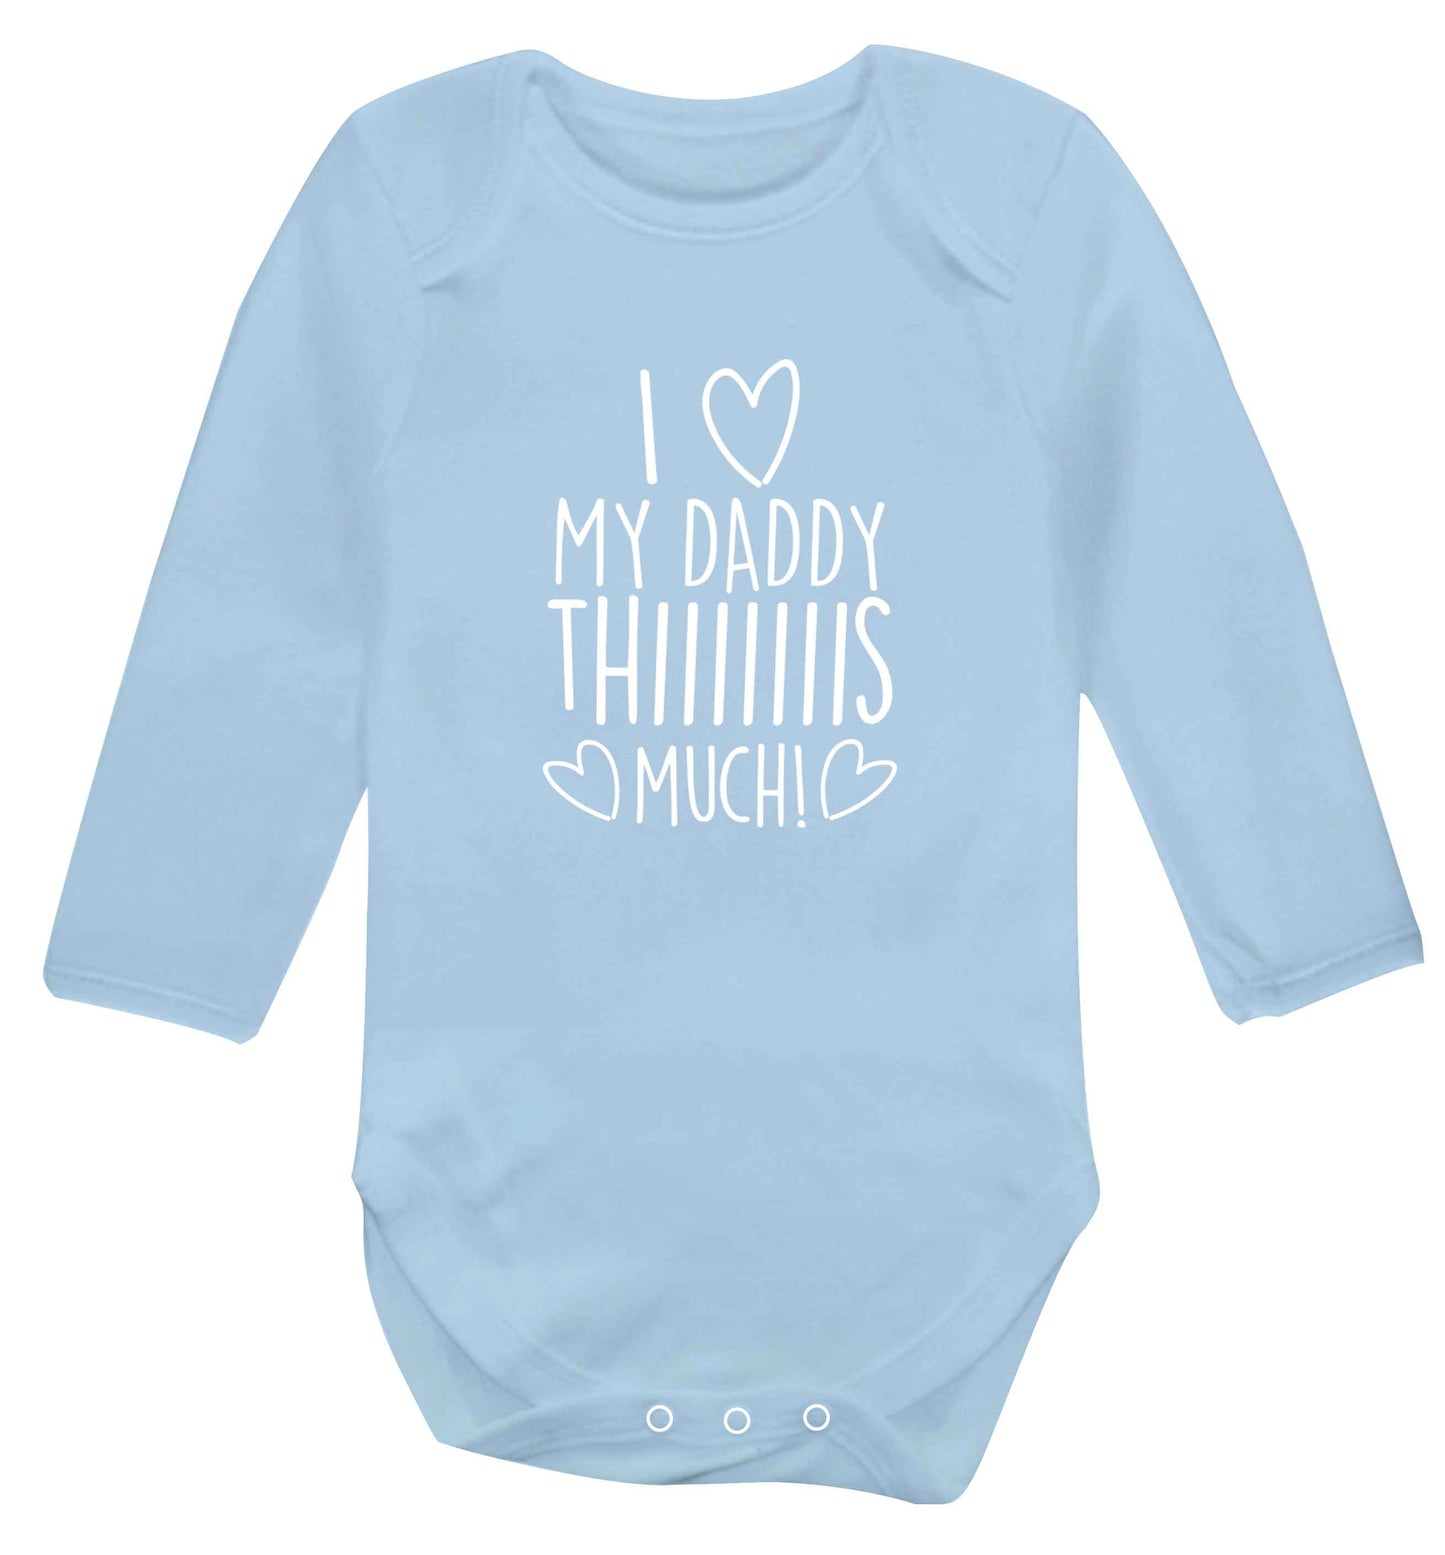 I love my daddy thiiiiis much! baby vest long sleeved pale blue 6-12 months